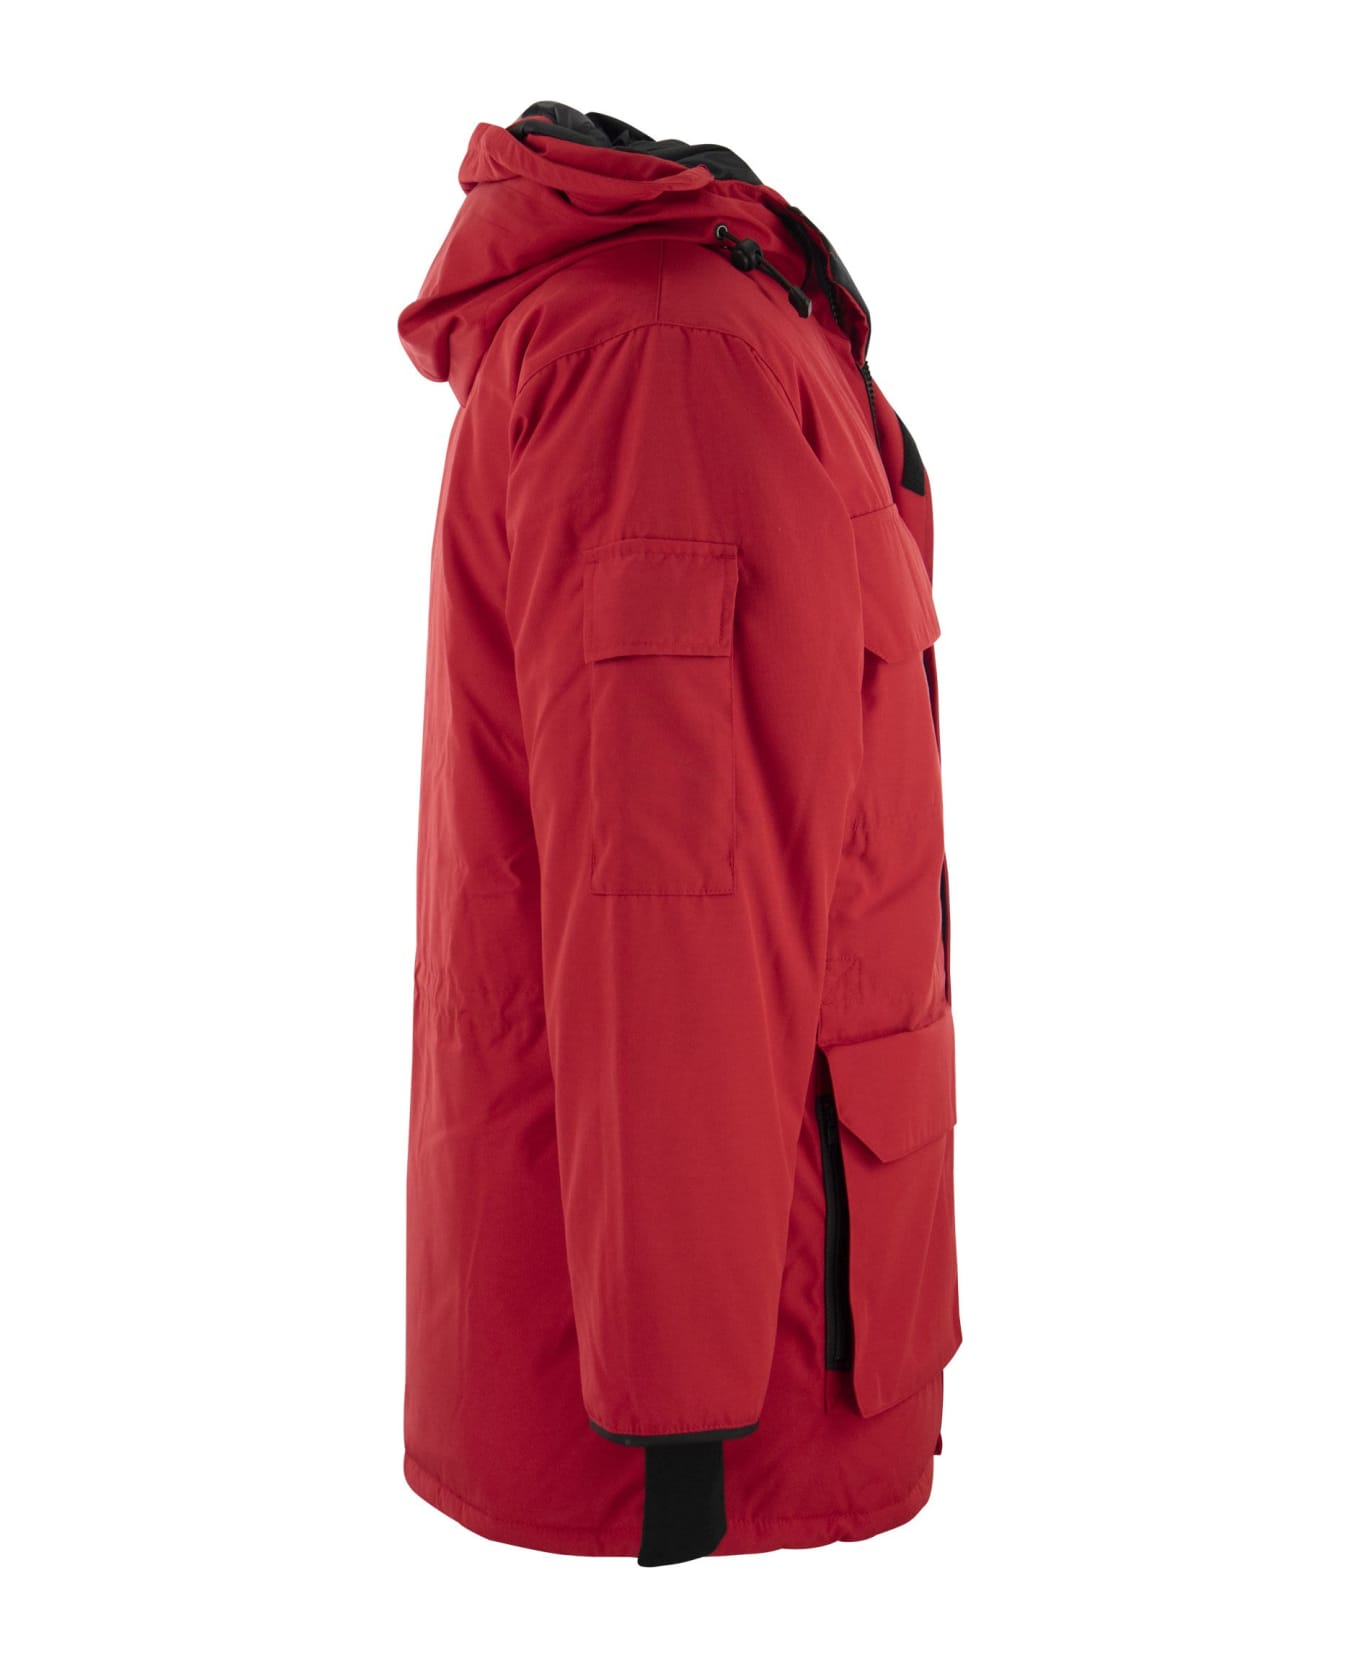 Canada Goose 'expedition' Red Cotton Blend Parka - Red